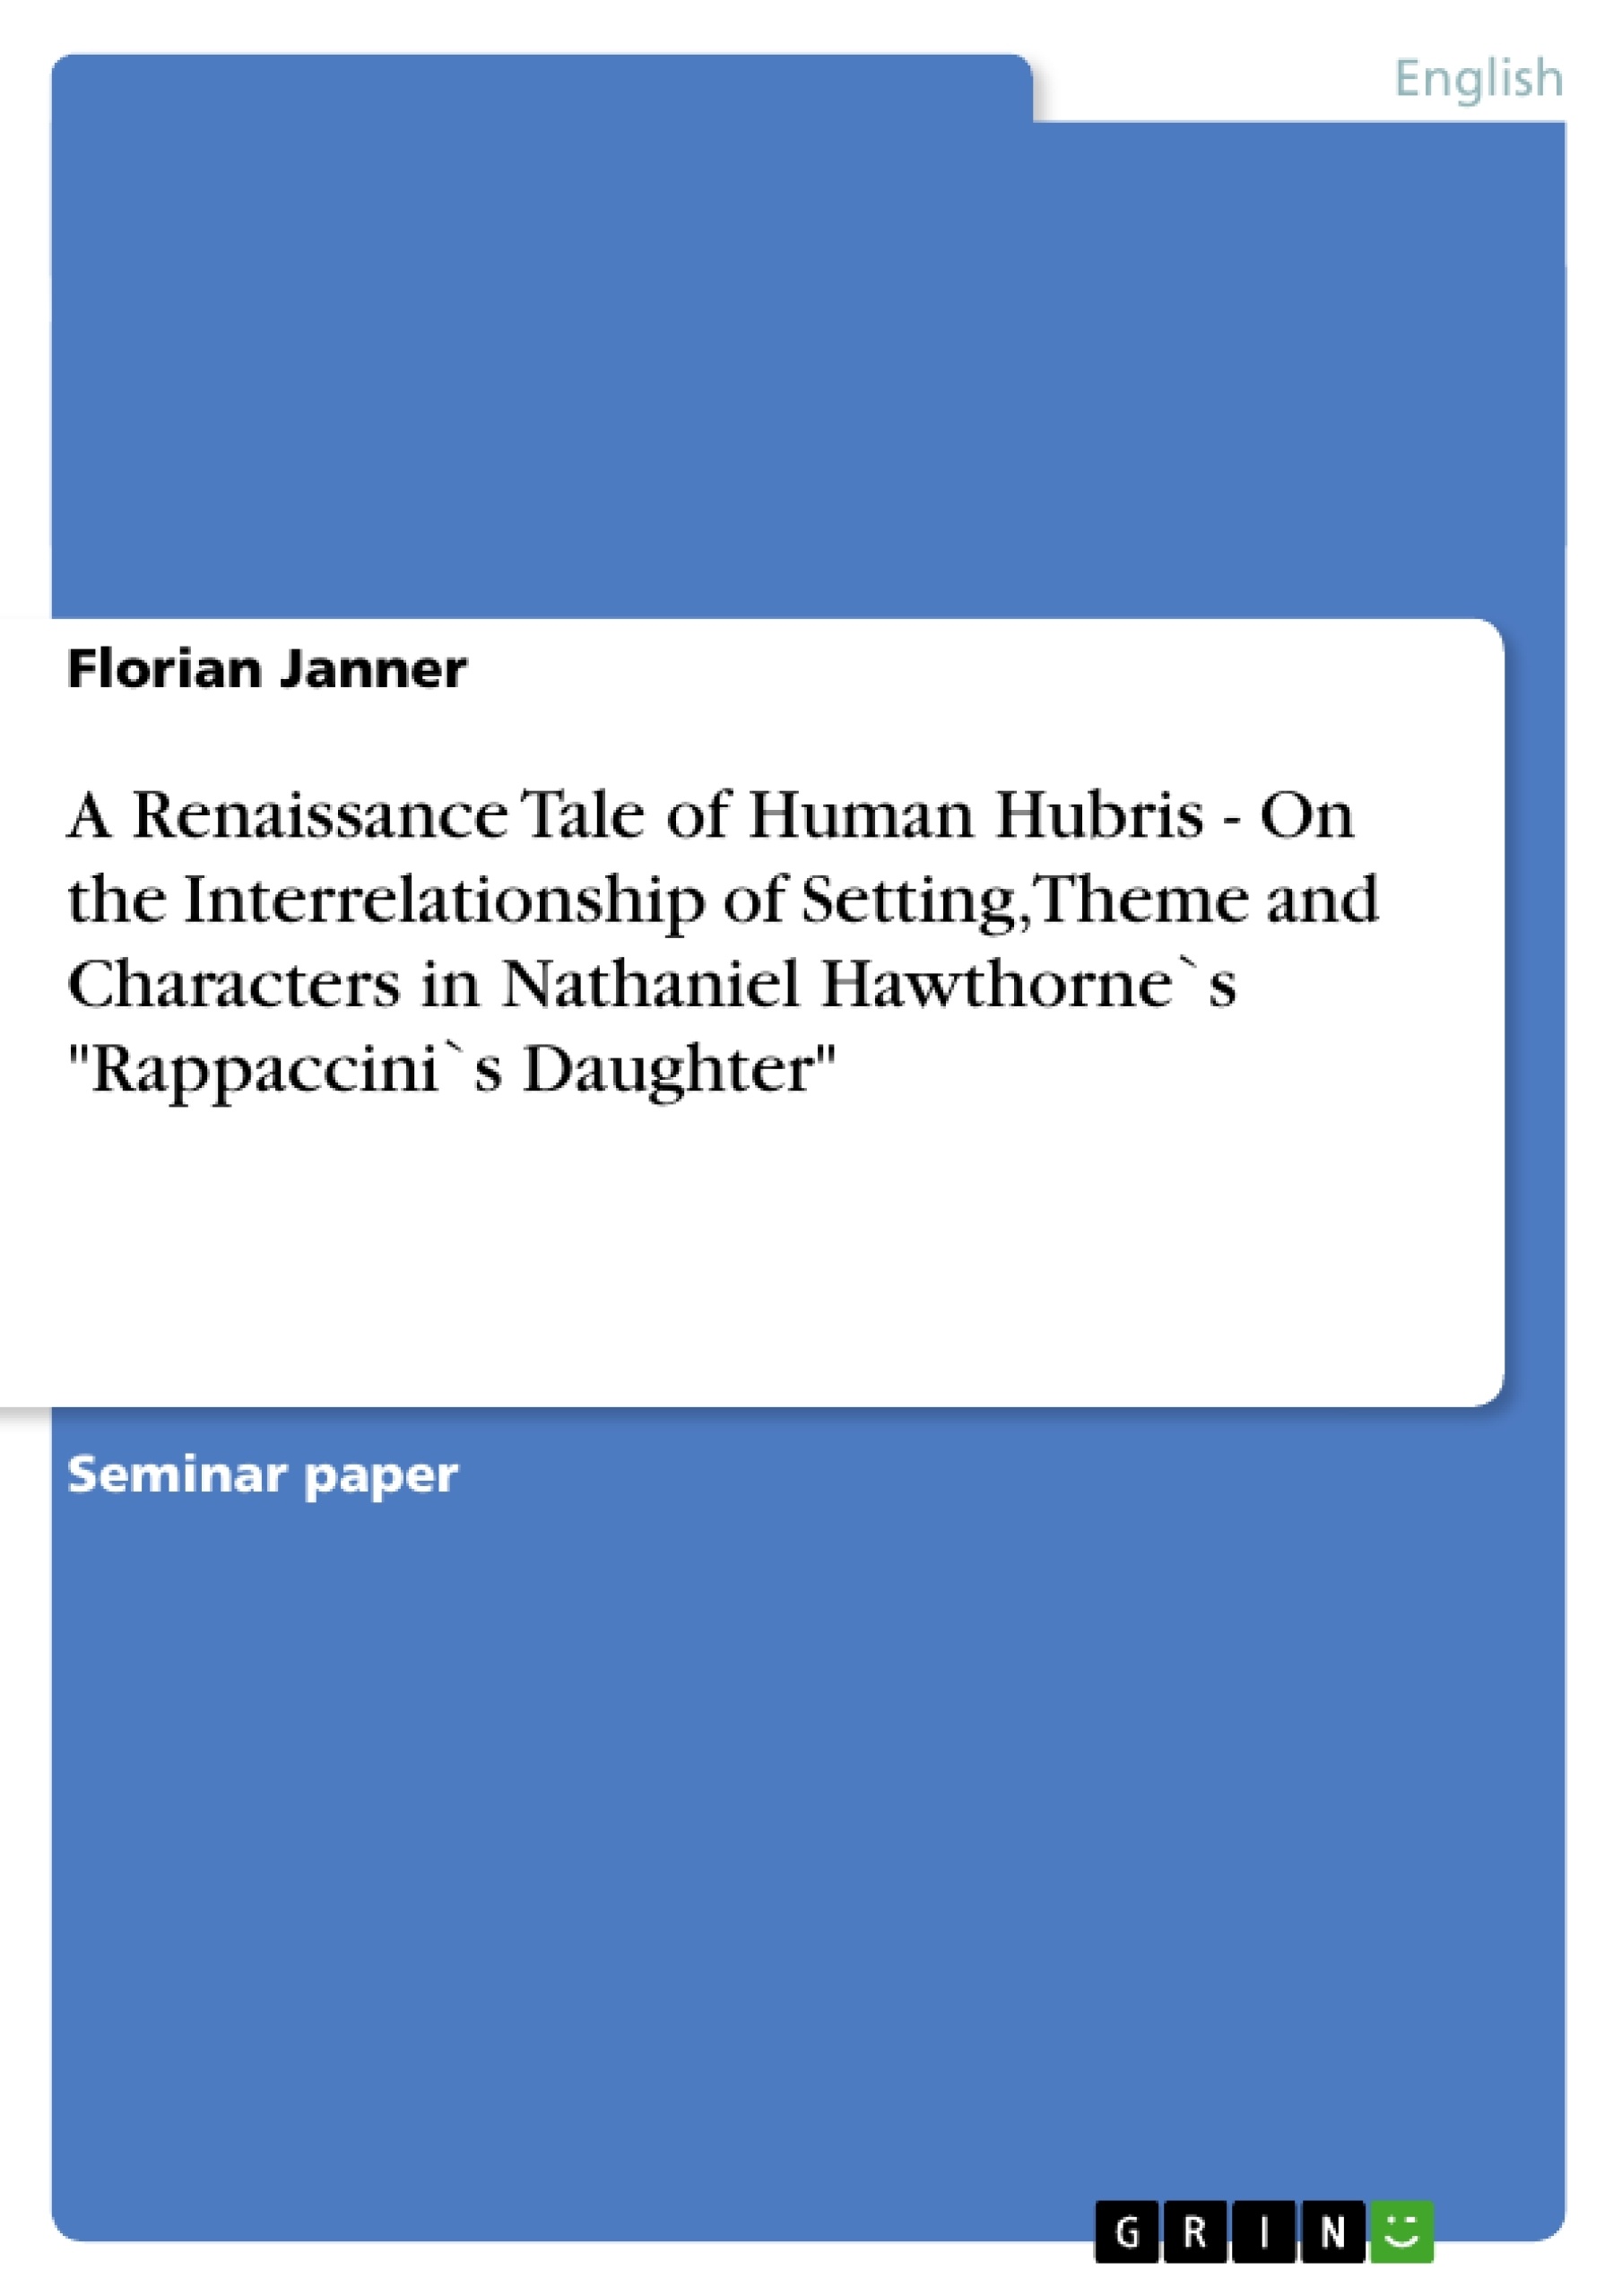 Titre: A Renaissance Tale of Human Hubris - On the Interrelationship of Setting, Theme and Characters in Nathaniel Hawthorne`s "Rappaccini`s Daughter"